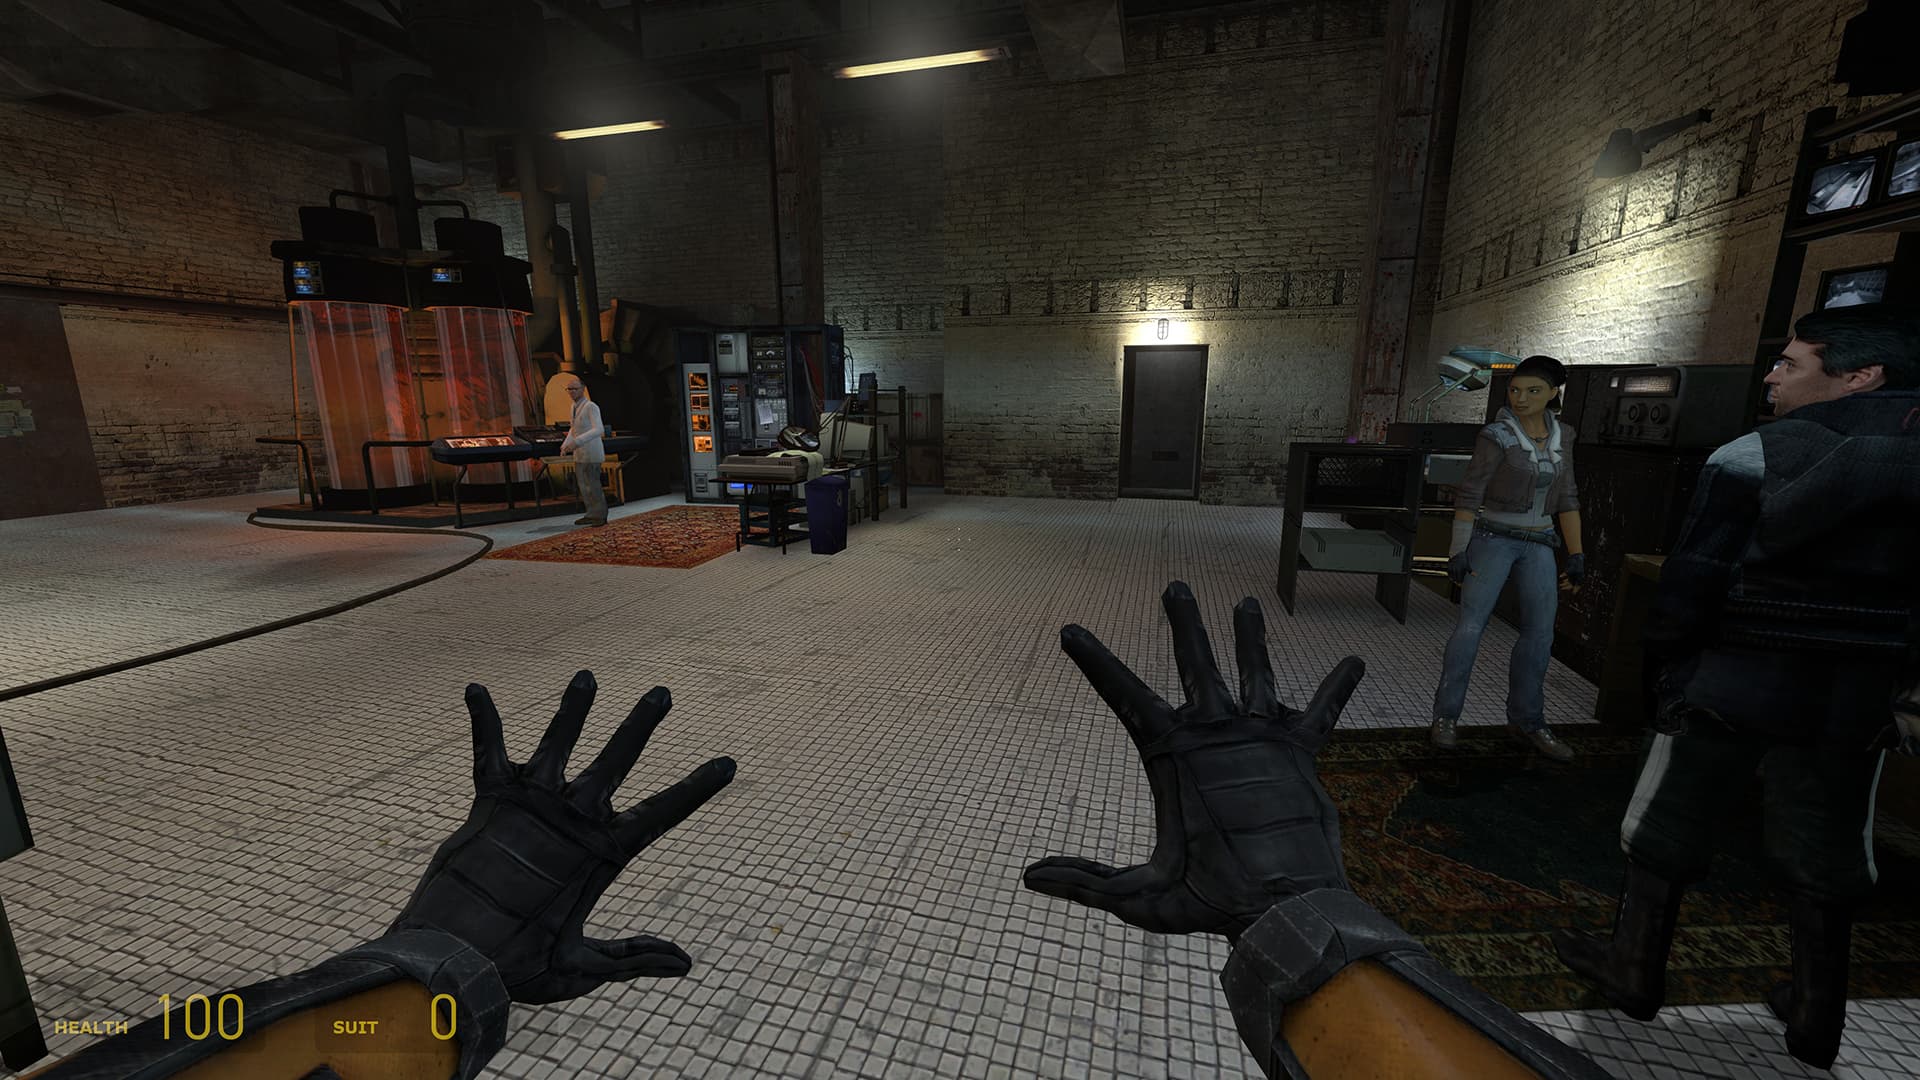 A screenshot from Half-Life 2. Gordon Freeman checks out his new gloves at Doctor Isaac Kleiner's lab as Alyx Vance, Barney Calhoun and Doctor Kleiner stand nearby.